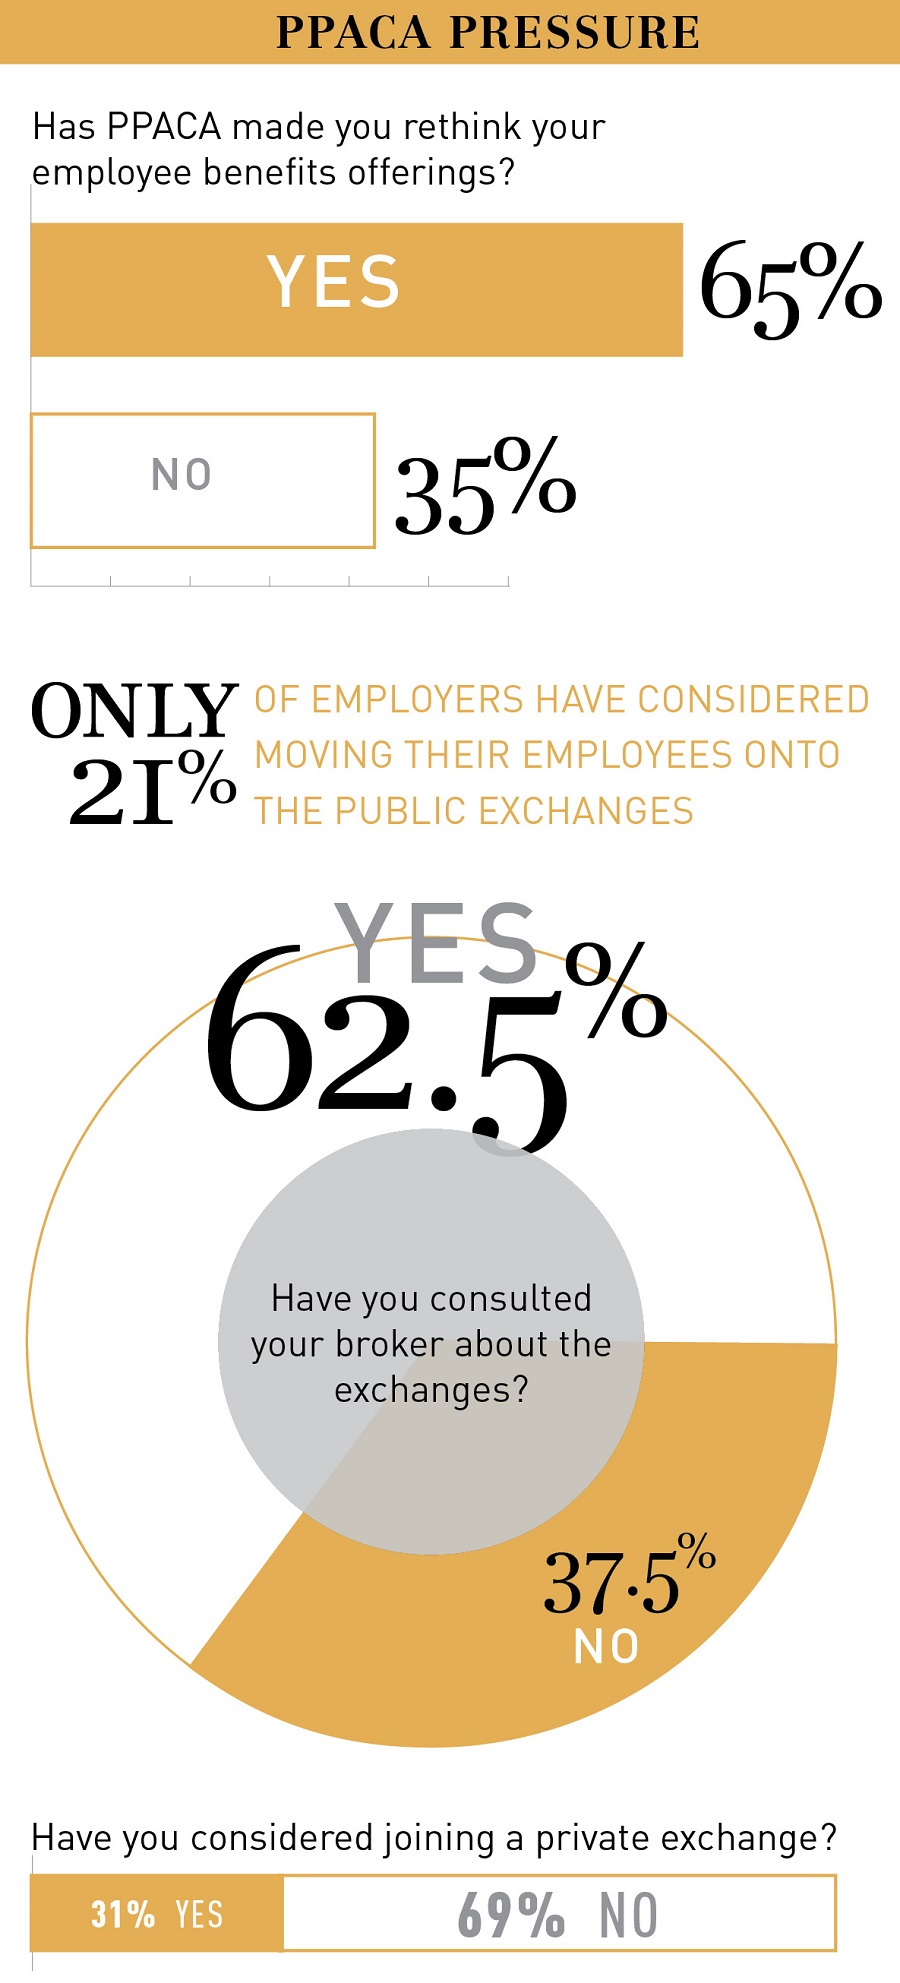 How PPACA is affecting employee benefits, from Benefits Selling Magazine 2015 Benefits Survey